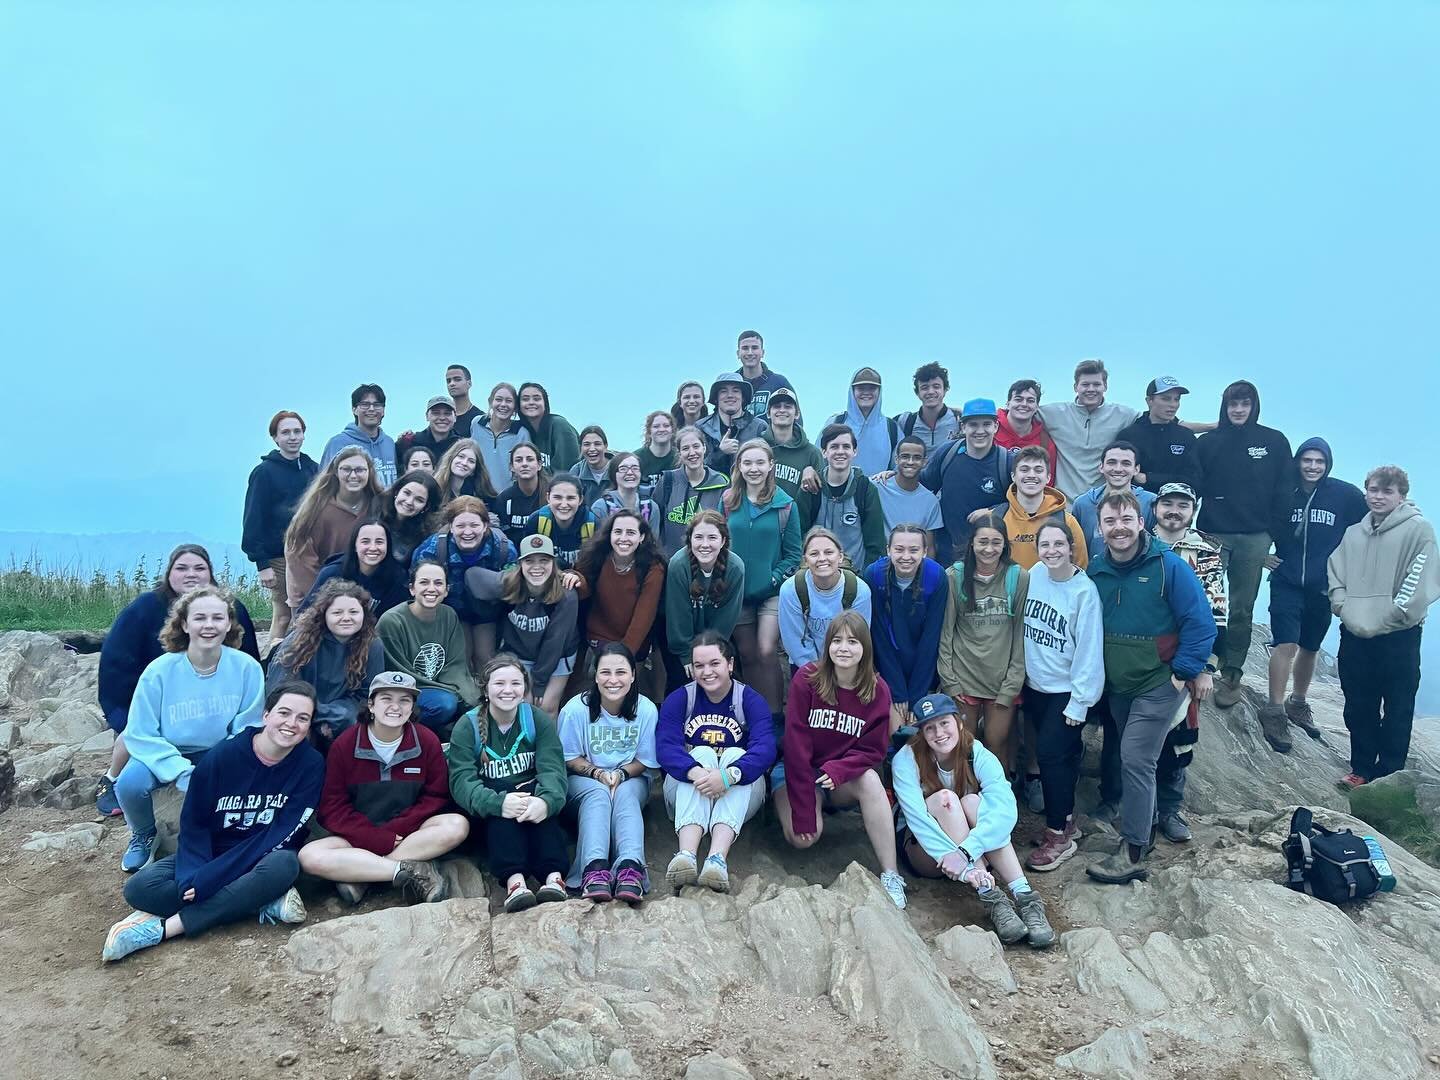 Worship at Black Balsam Knob! Kicking off full staff training with one of Ridge Haven&rsquo;s sweetest traditions. ⛰️🎶 Would you join us in praying for our summer staff of awesome college and high school students? Here are some ways you can be prayi